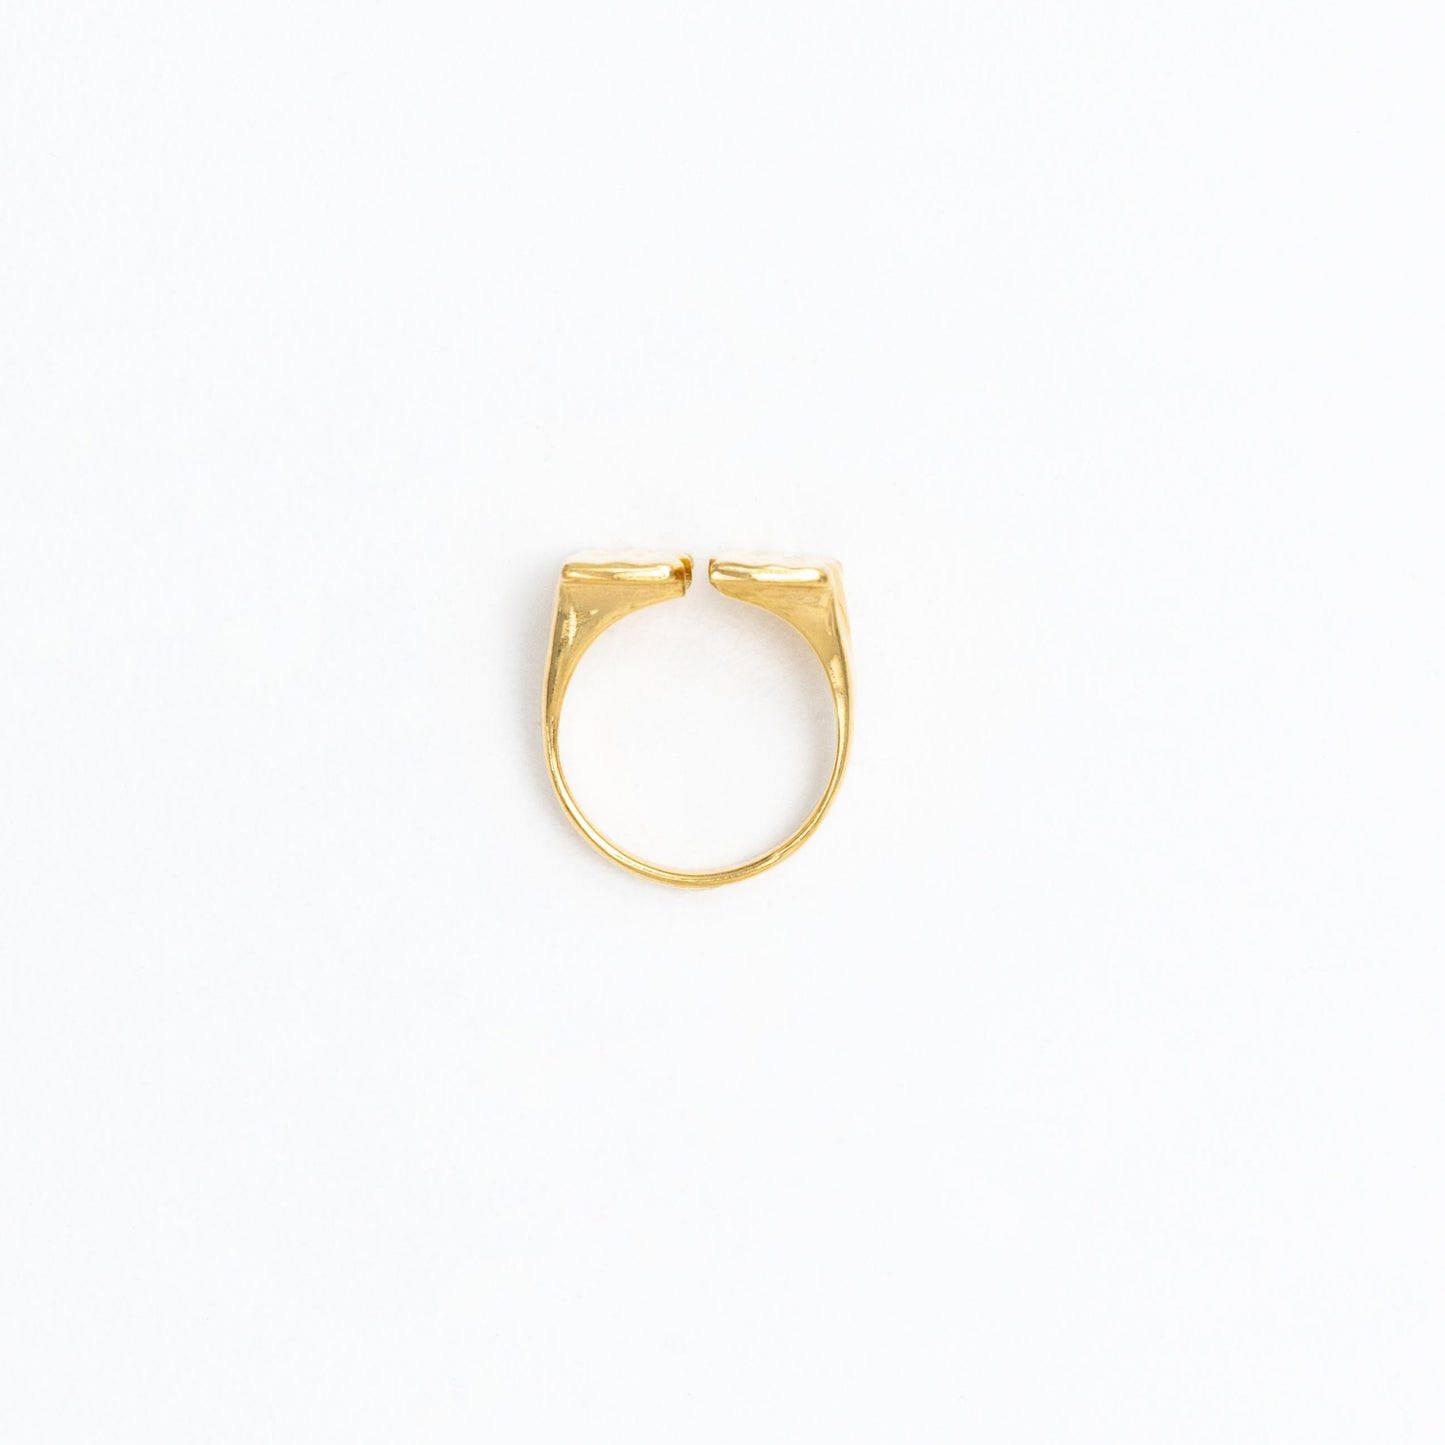 Adjustable gold ring, from above